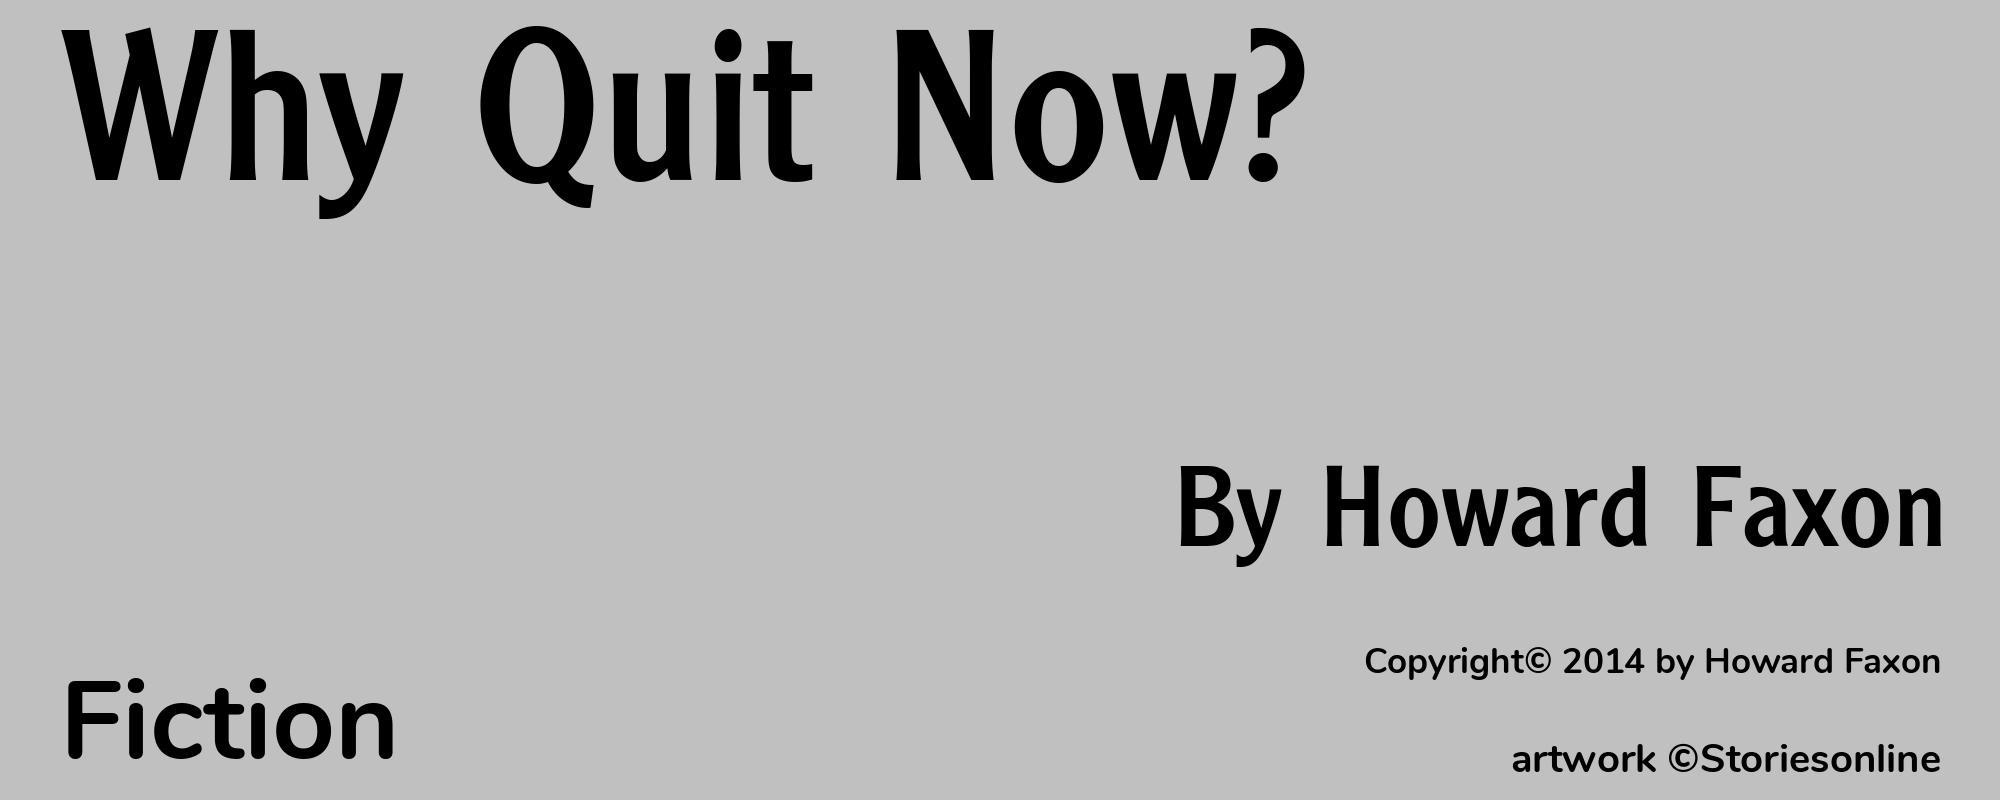 Why Quit Now? - Cover